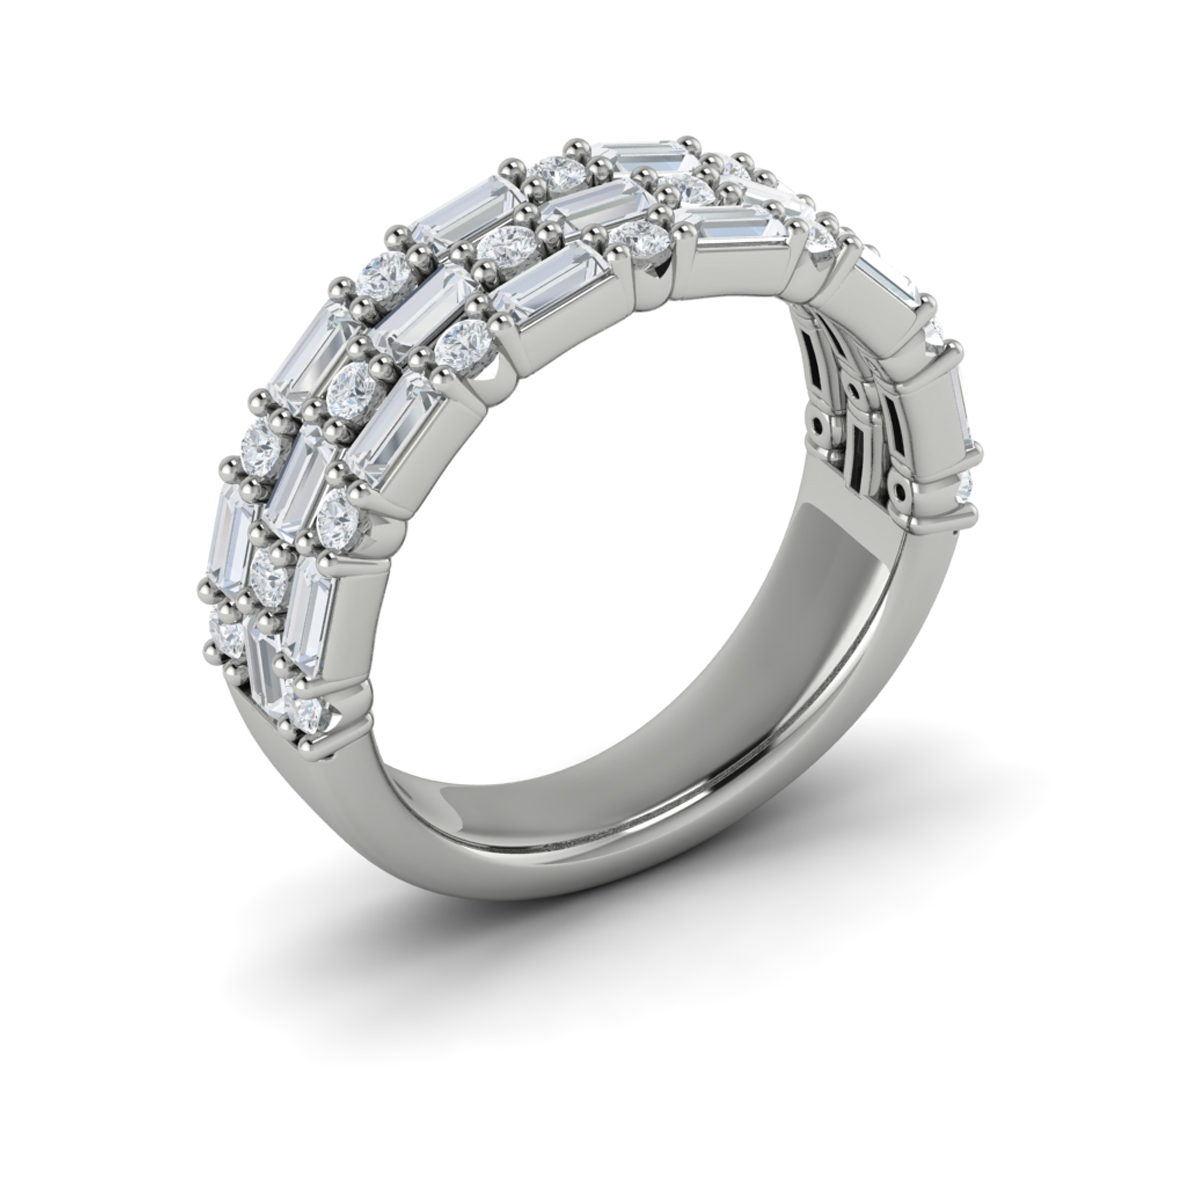 Vdora Jewelry will capture the moments, mark the milestones, and embrace the passions that dwell in your heart.